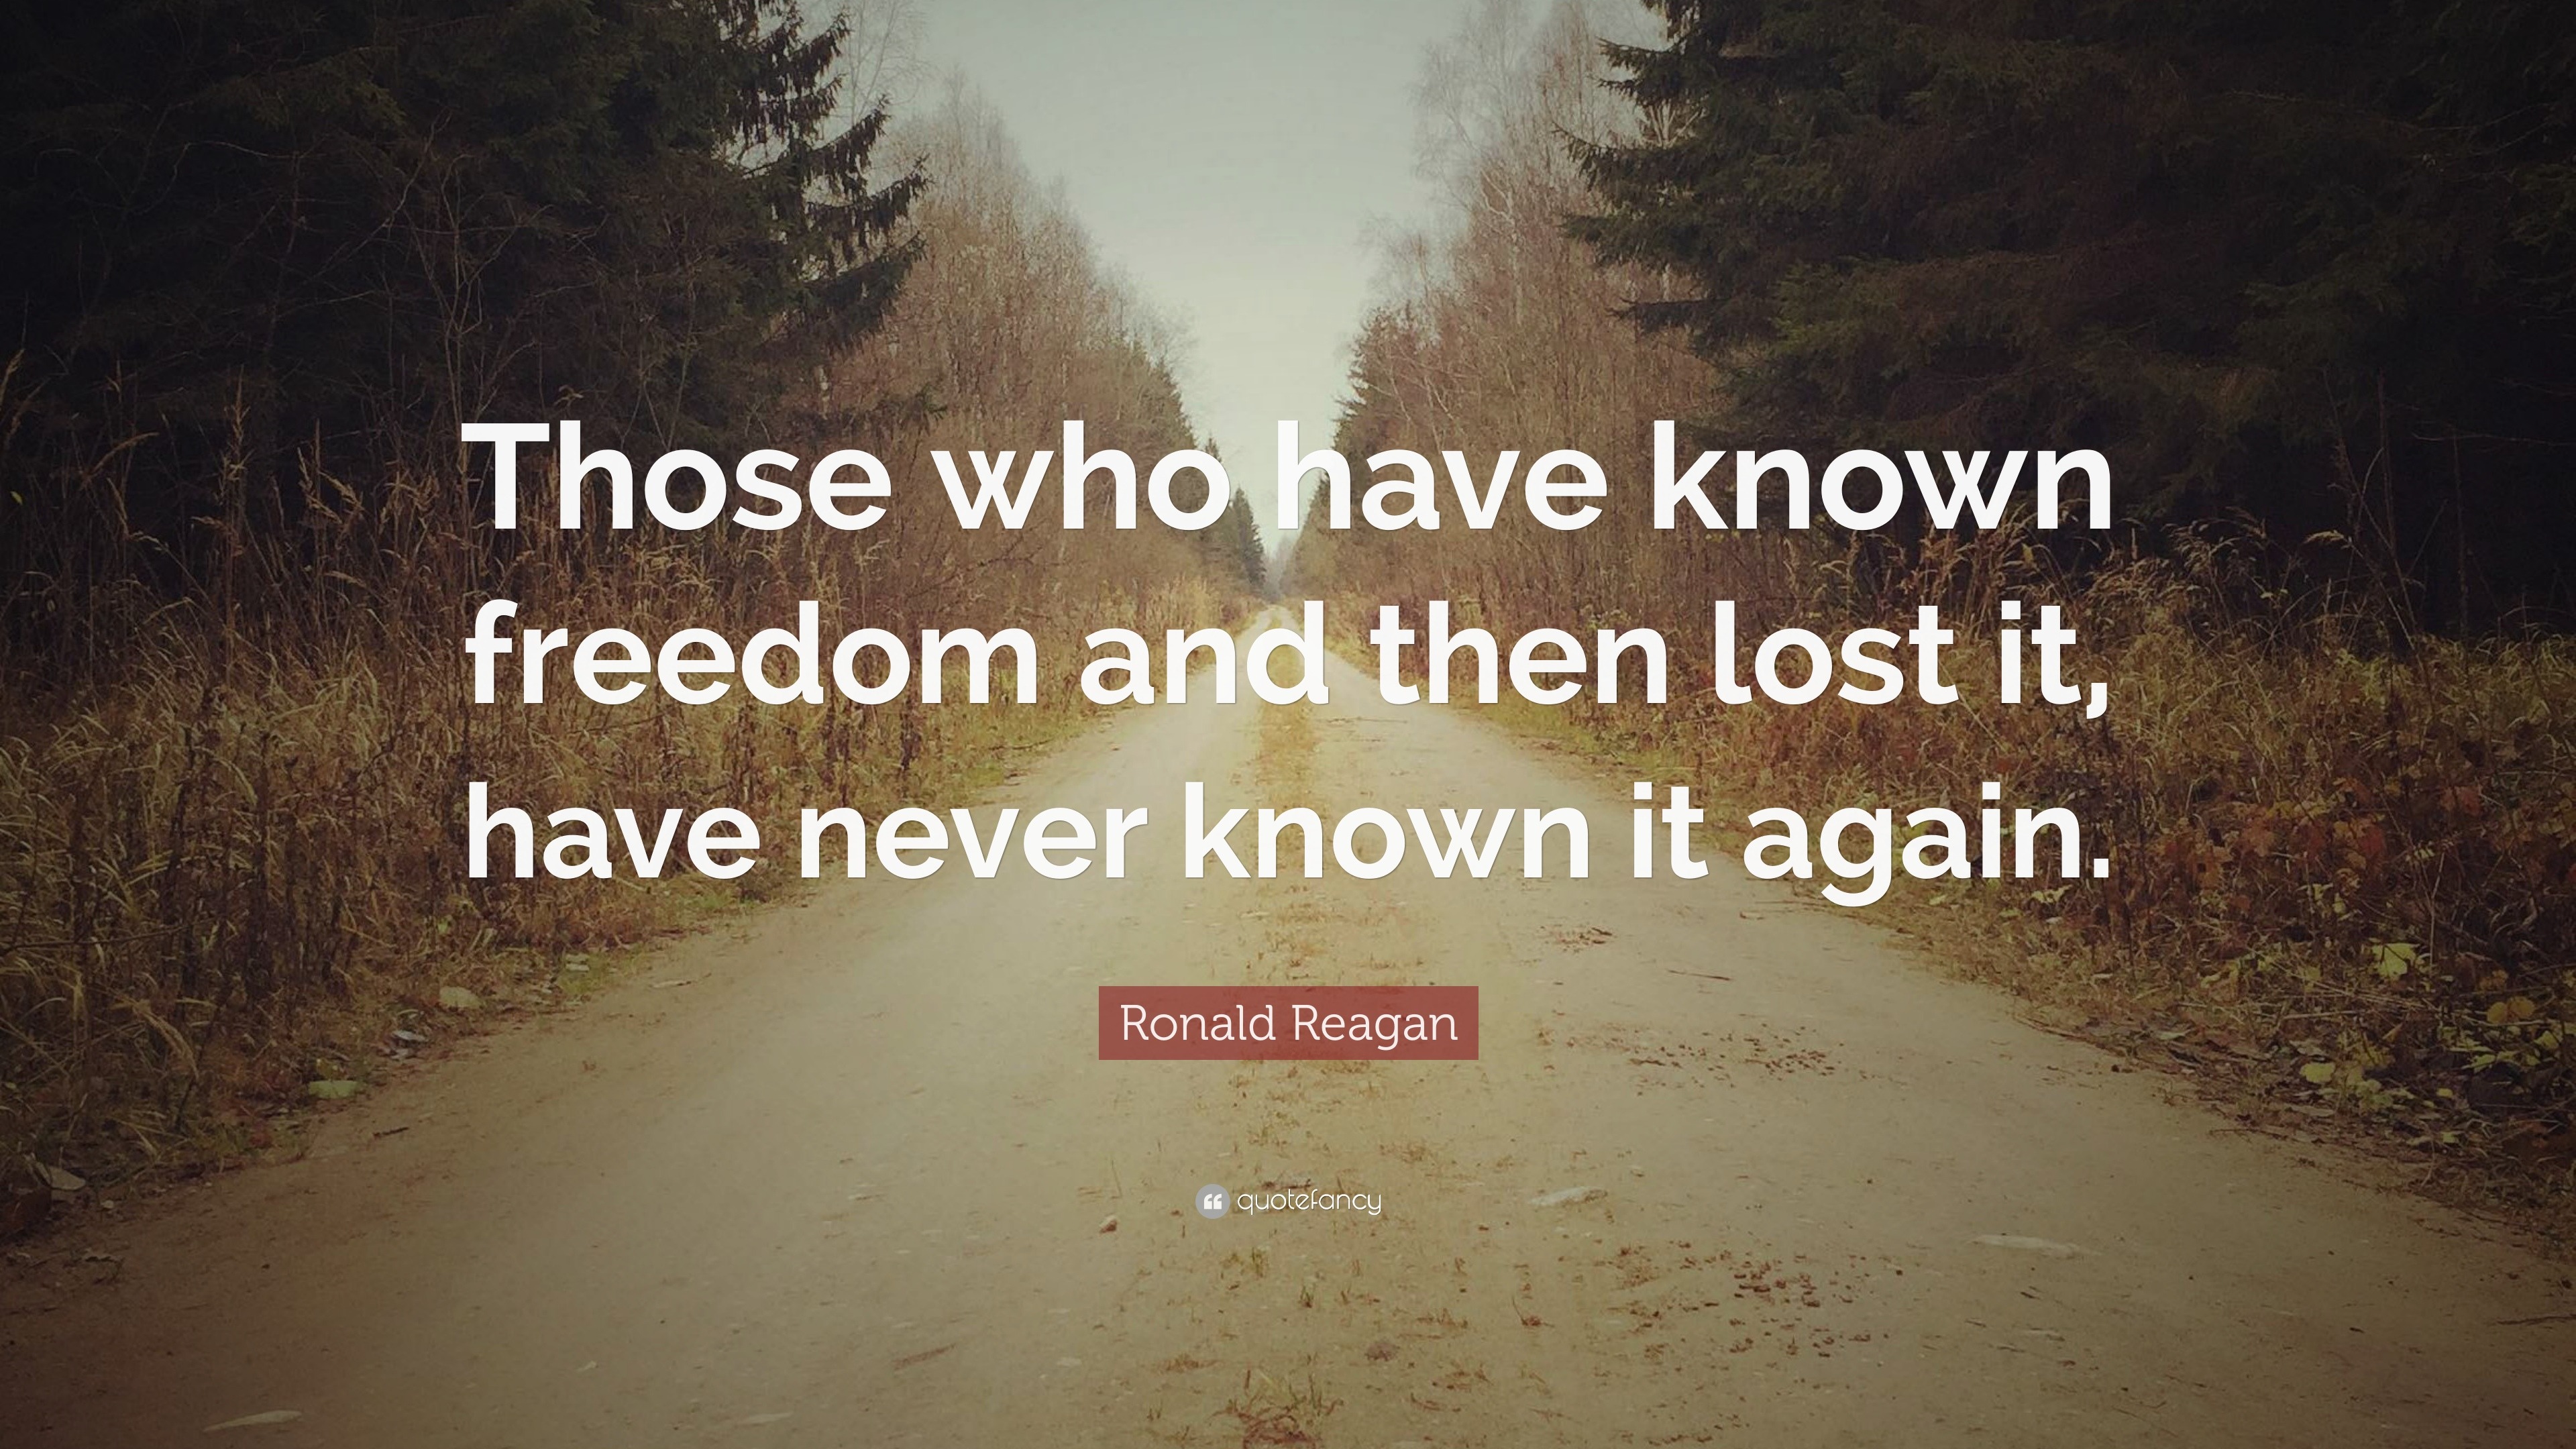 Ronald Reagan Quote “Those who have known freedom and